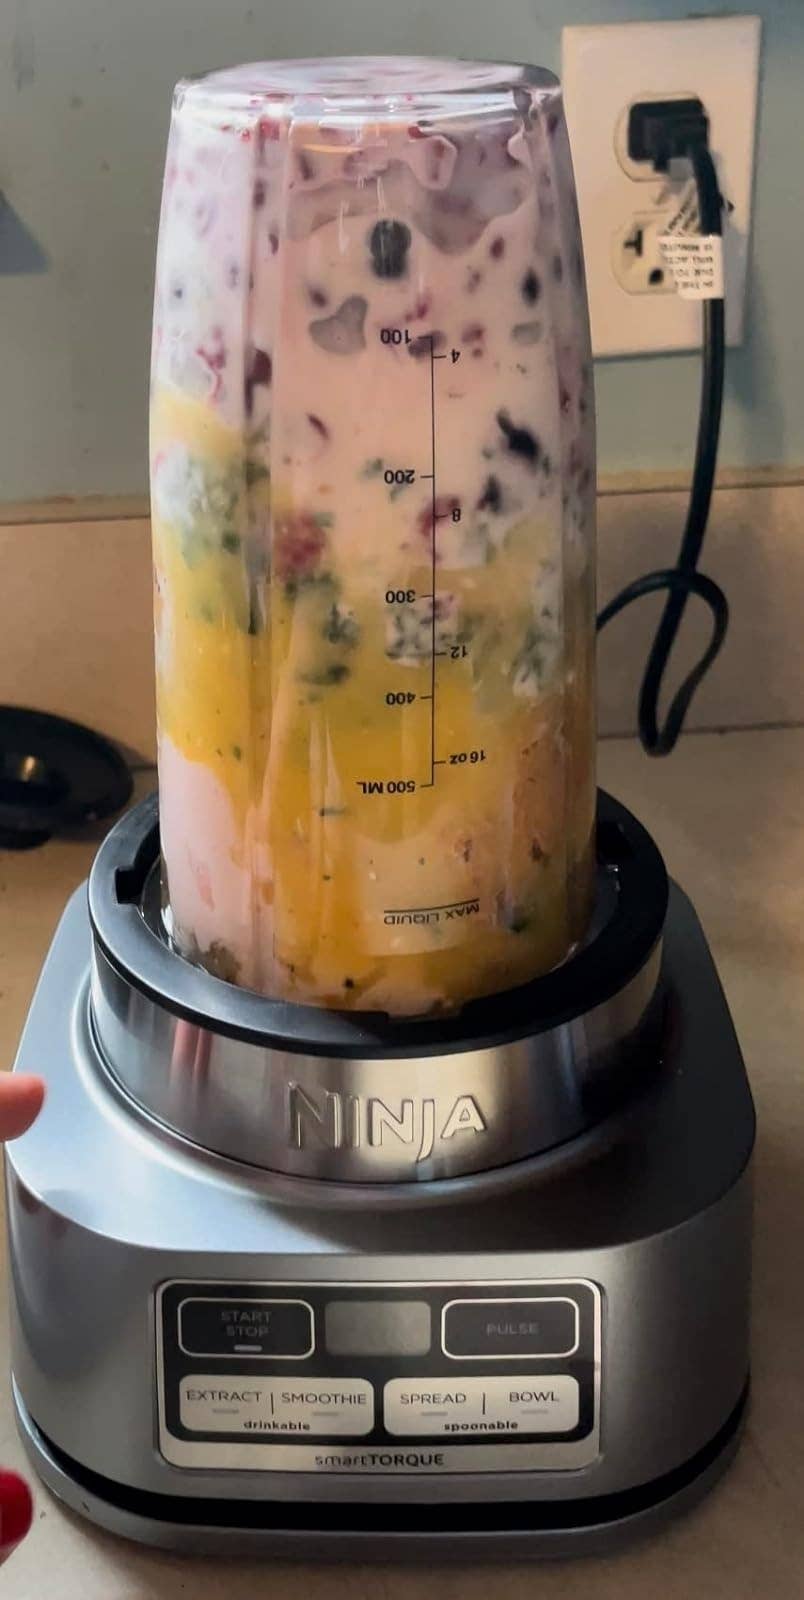 This Tiny Blender Is The Most Powerful One Our Food Editor Has Ever Seen